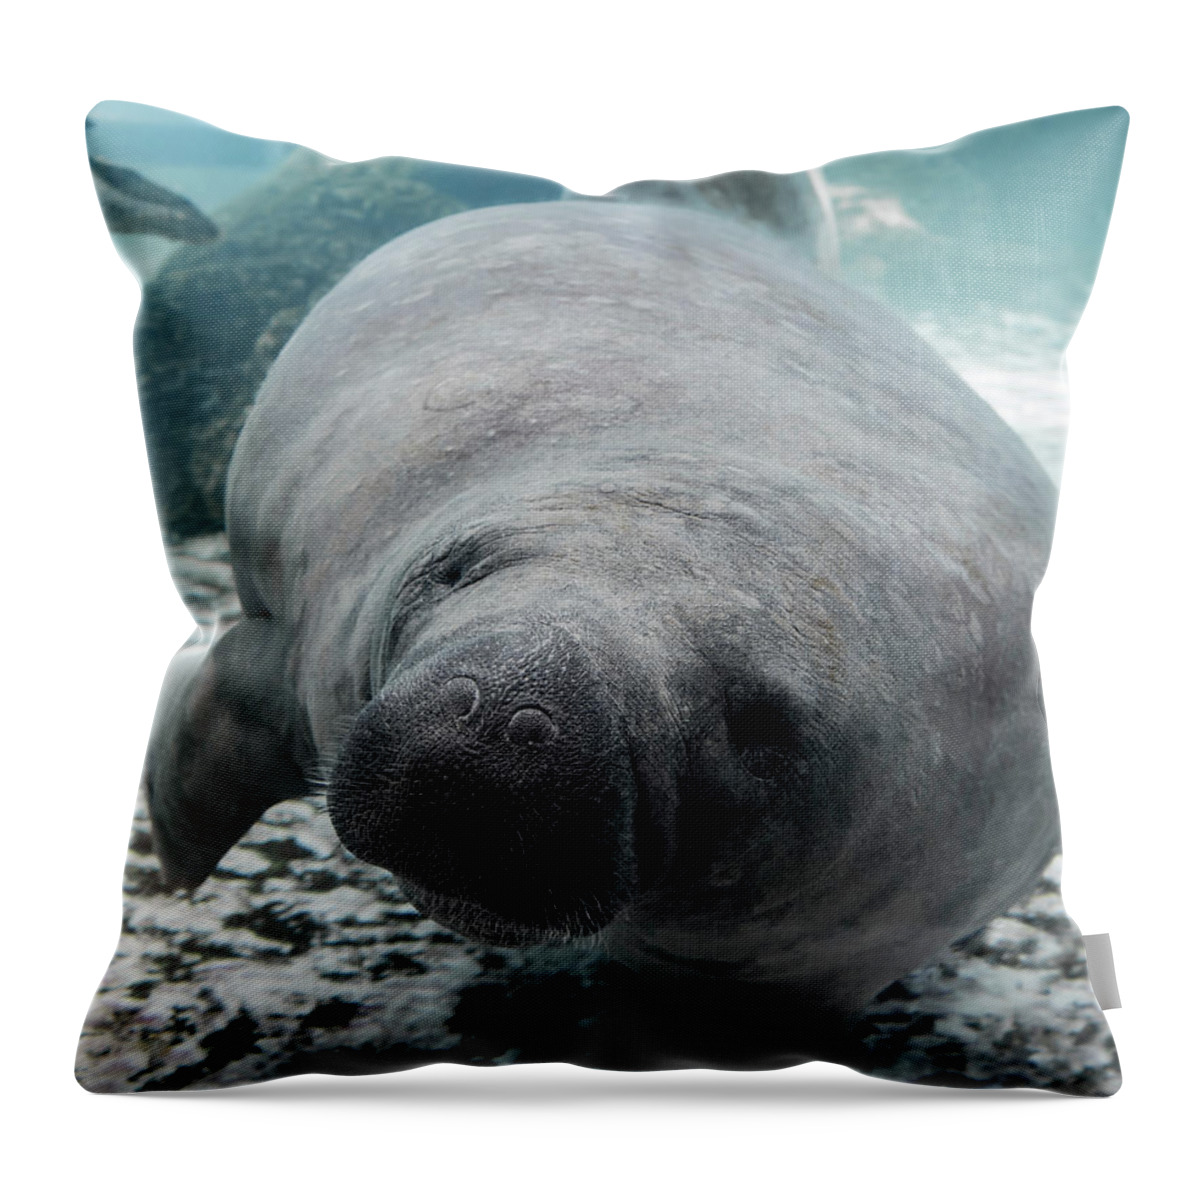 Manatee Throw Pillow featuring the photograph Manatee by Tracy Winter